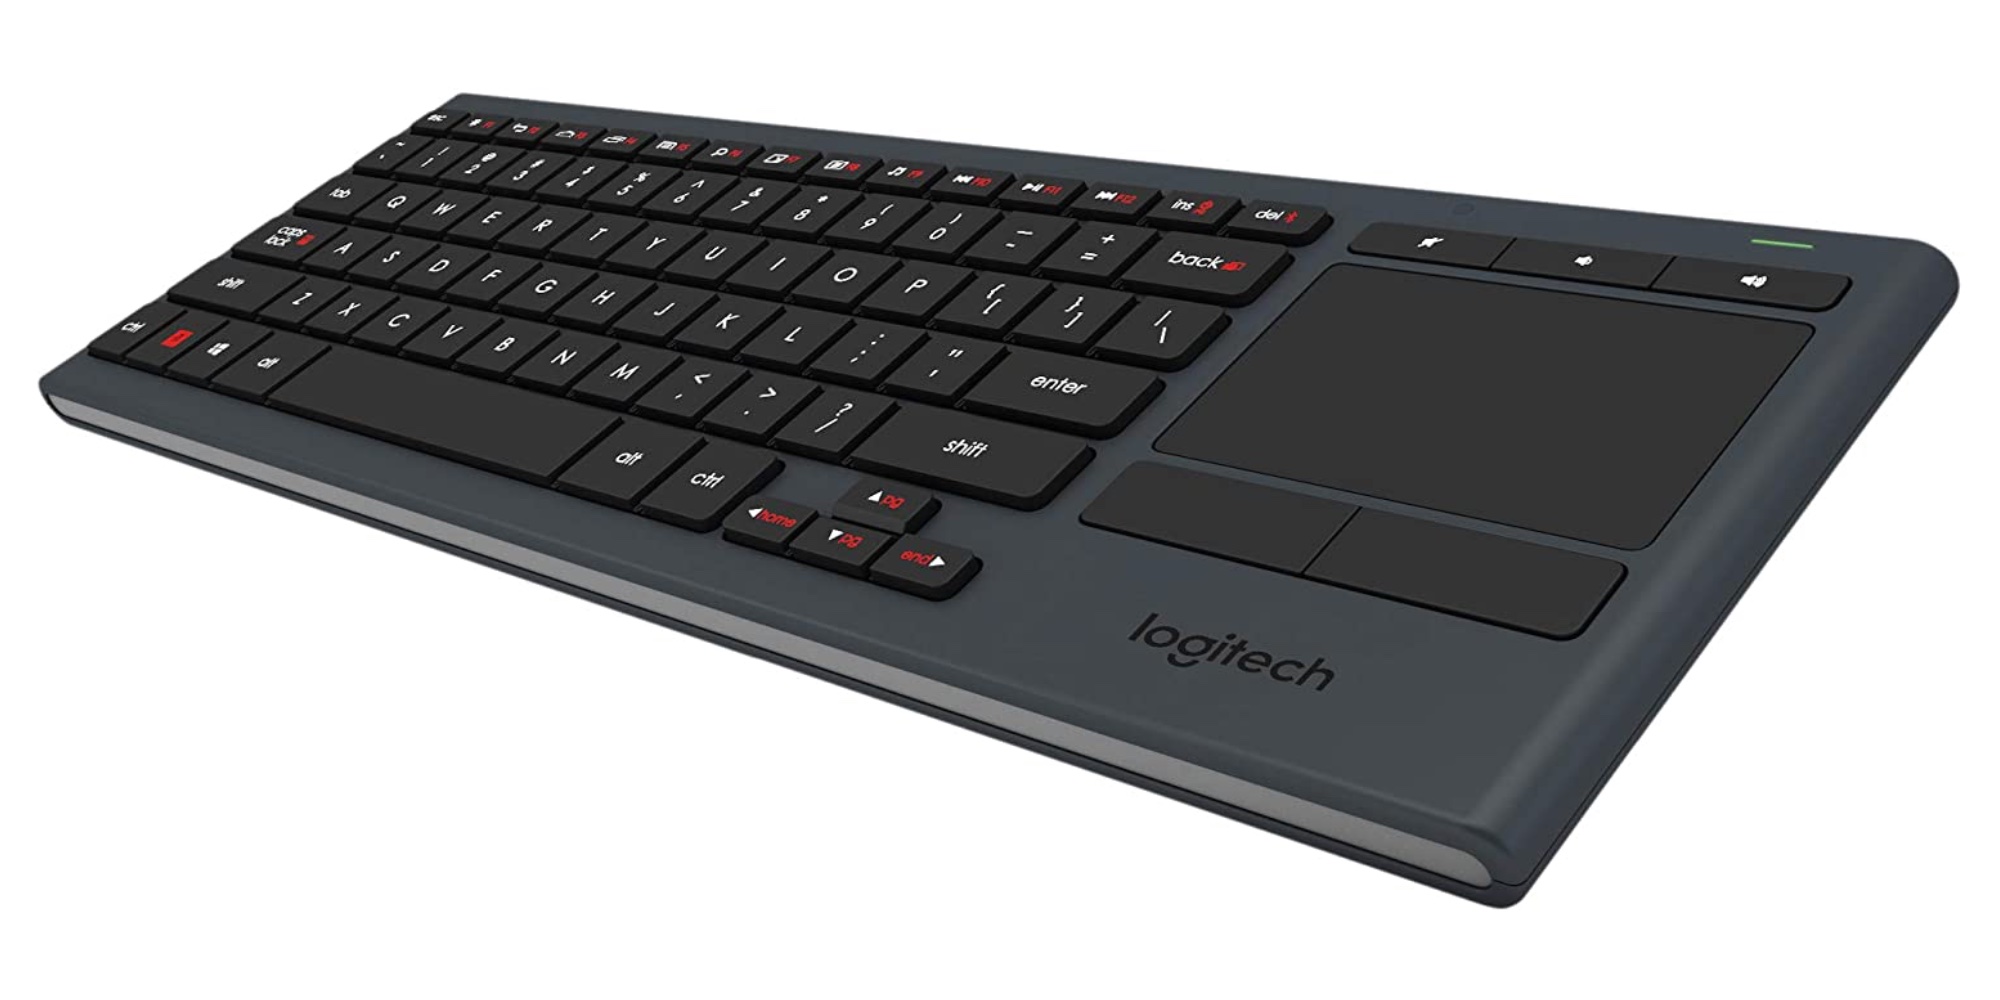 Logitech's Illuminated Keyboard has a built-in trackpad (20% off), more from $18